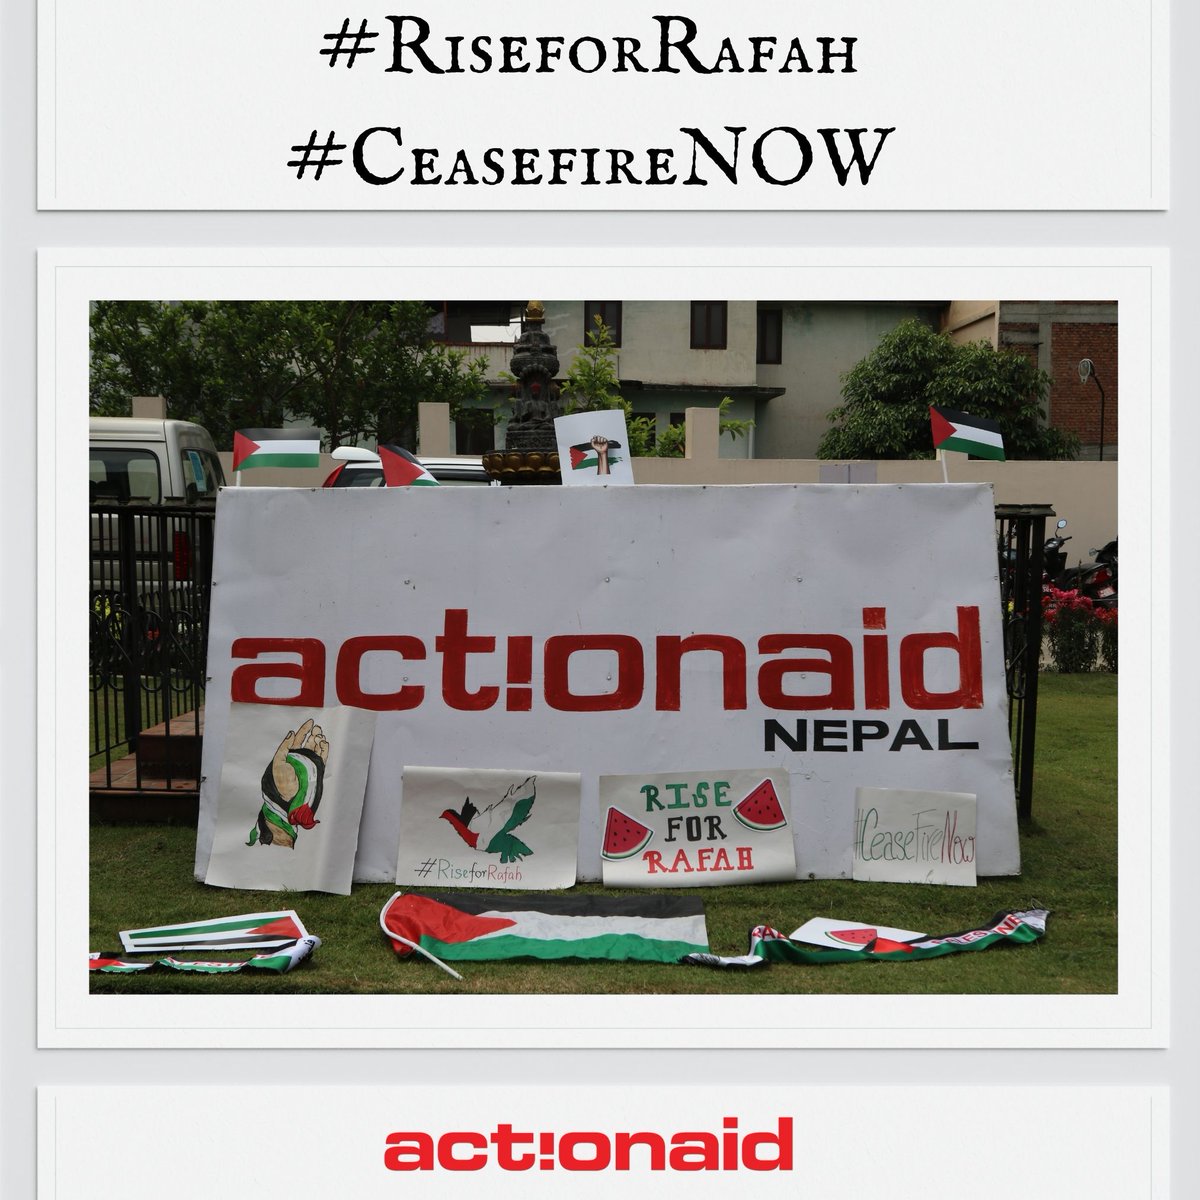 The spirit of solidarity transcends borders. ActionAid International Nepal joins hands with Rafah in the pursuit of peace. Stand with us using #RiseForRafah #CeasefireNOW